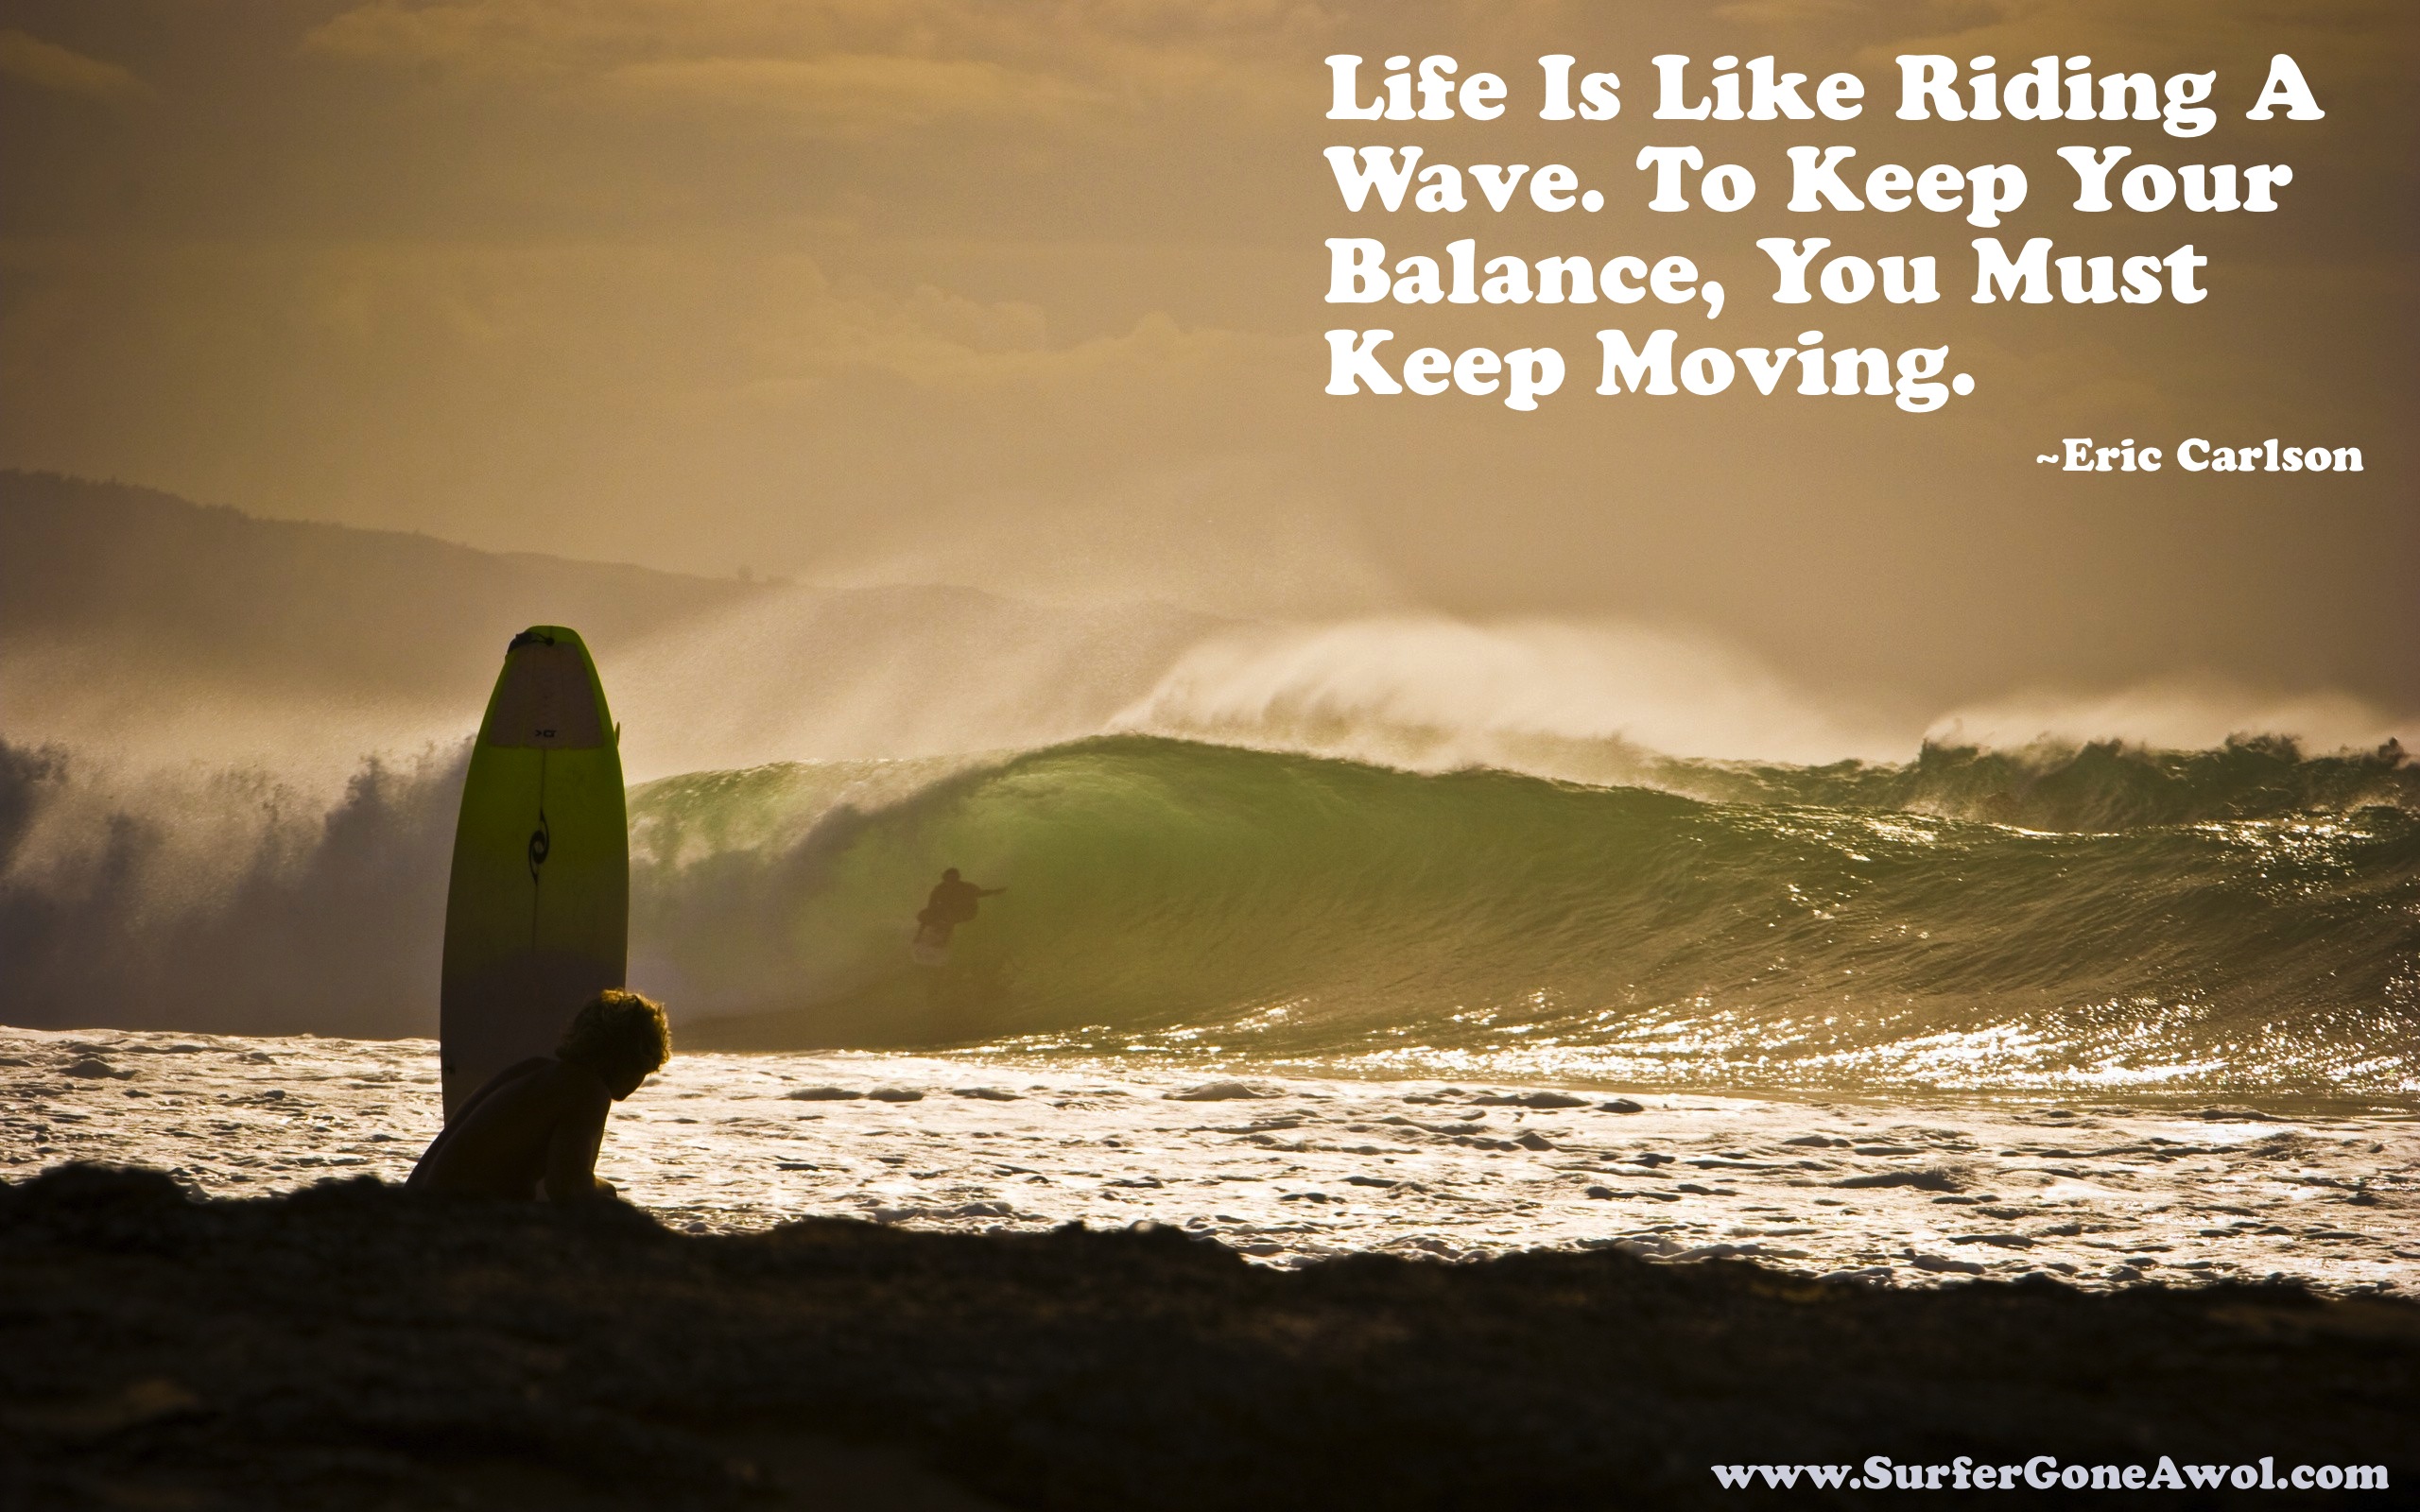 Ride The Waves Quotes. QuotesGram